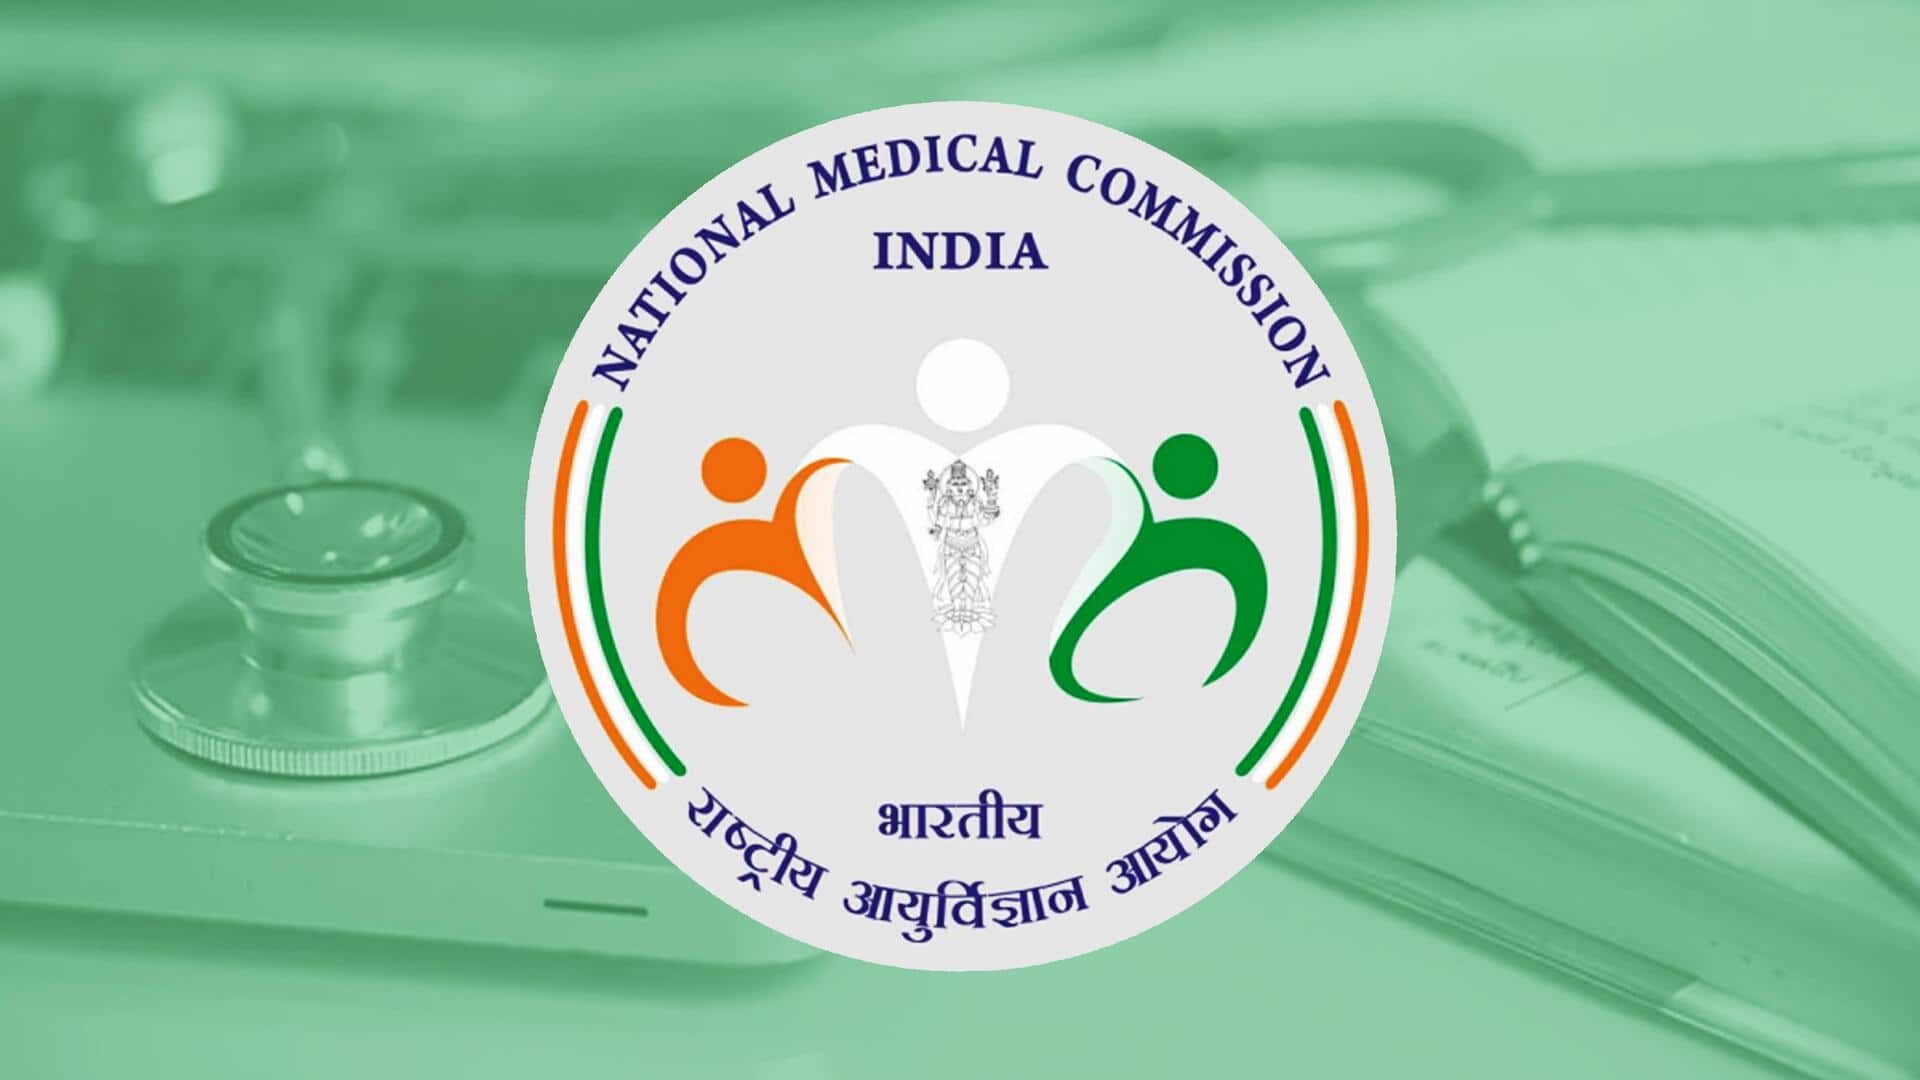 National Medical Commission cautions medical colleges over fake recognition letters